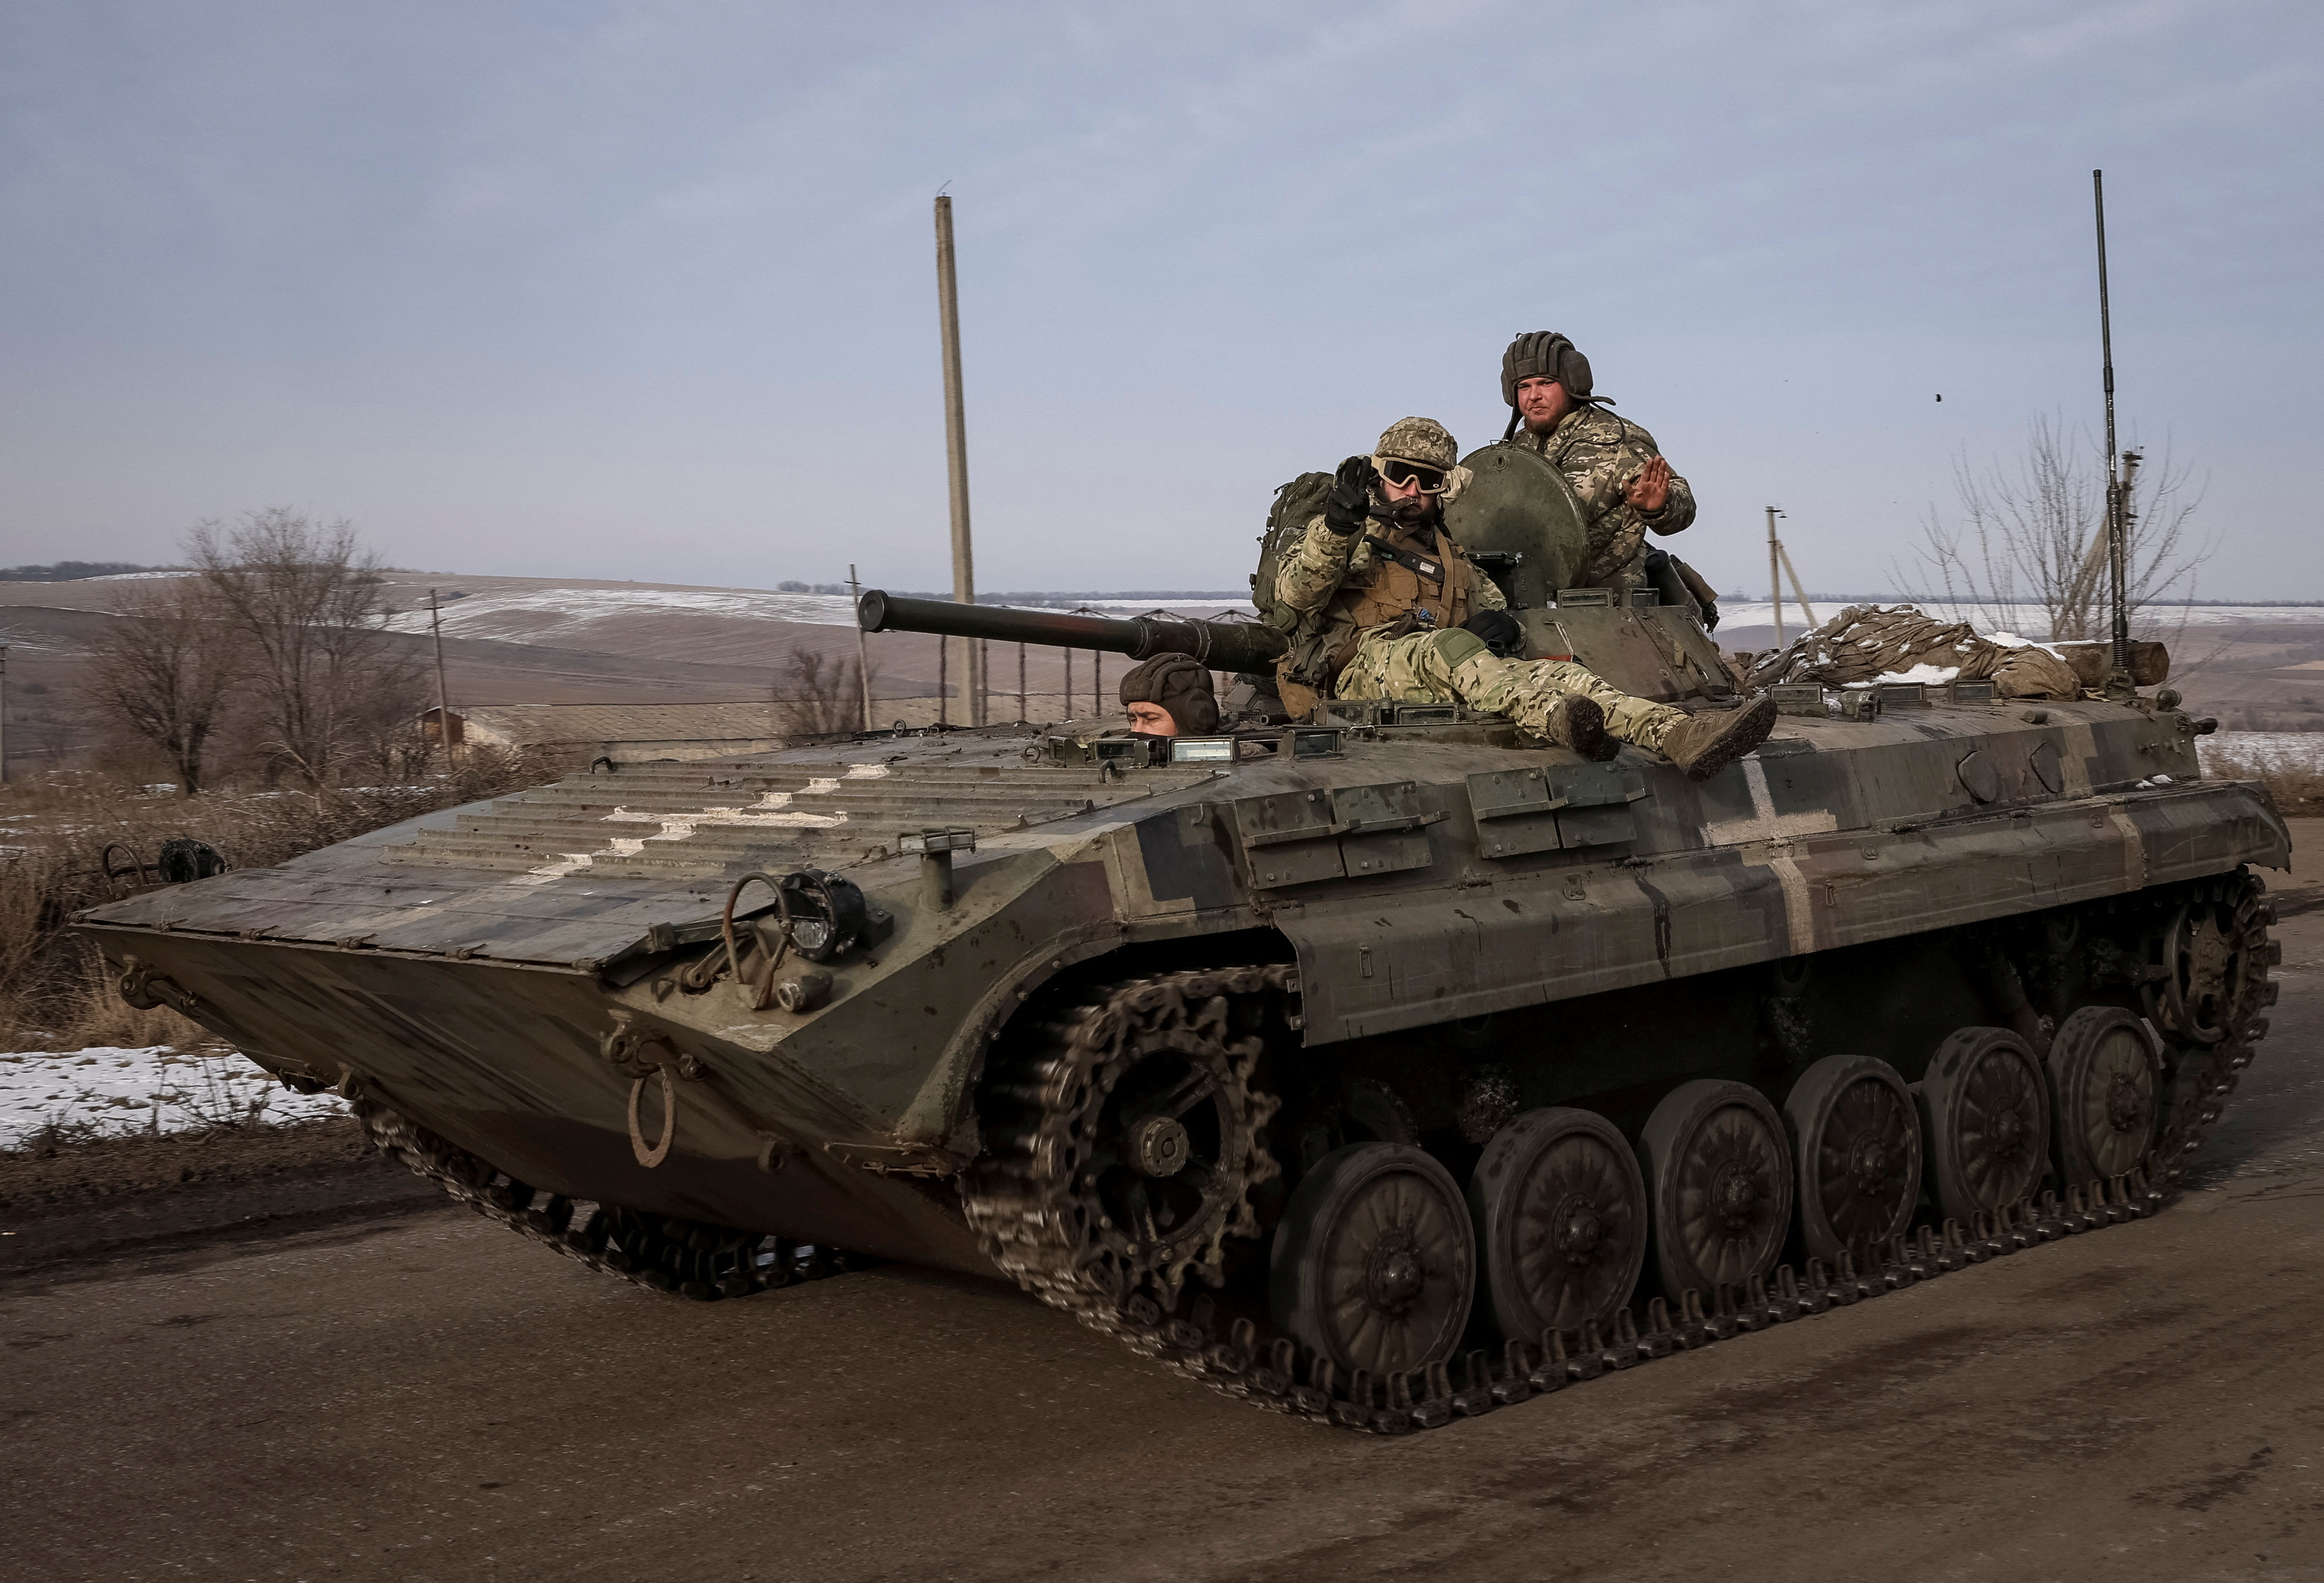 Ukrainian service members ride a BMP-1 infantry fighting vehicle near the frontline town of Bakhmut